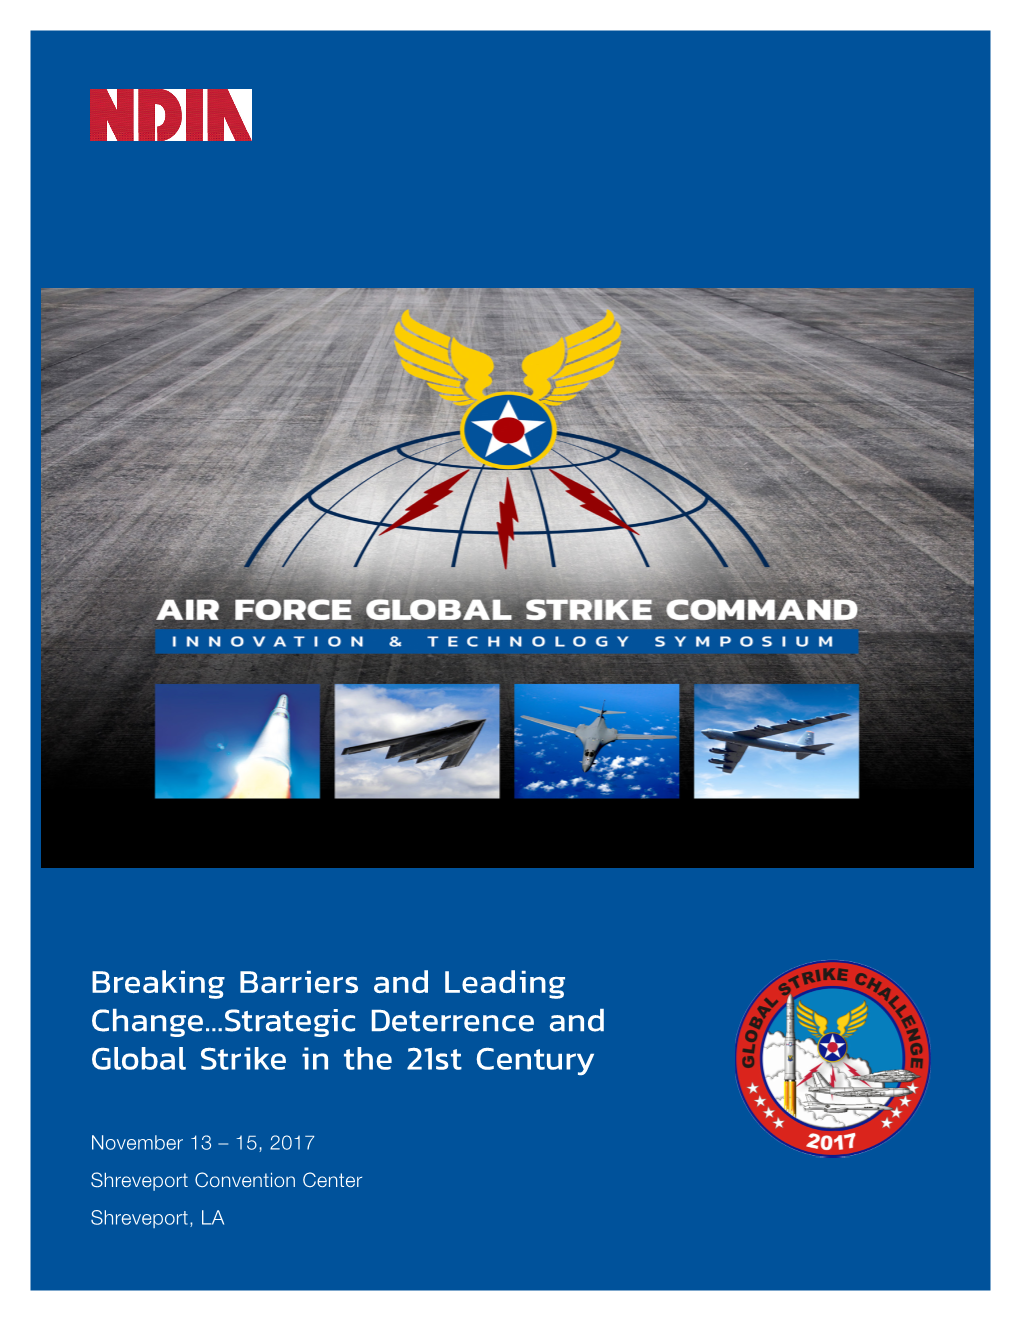 Breaking Barriers and Leading Change...Strategic Deterrence and Global Strike in the 21St Century